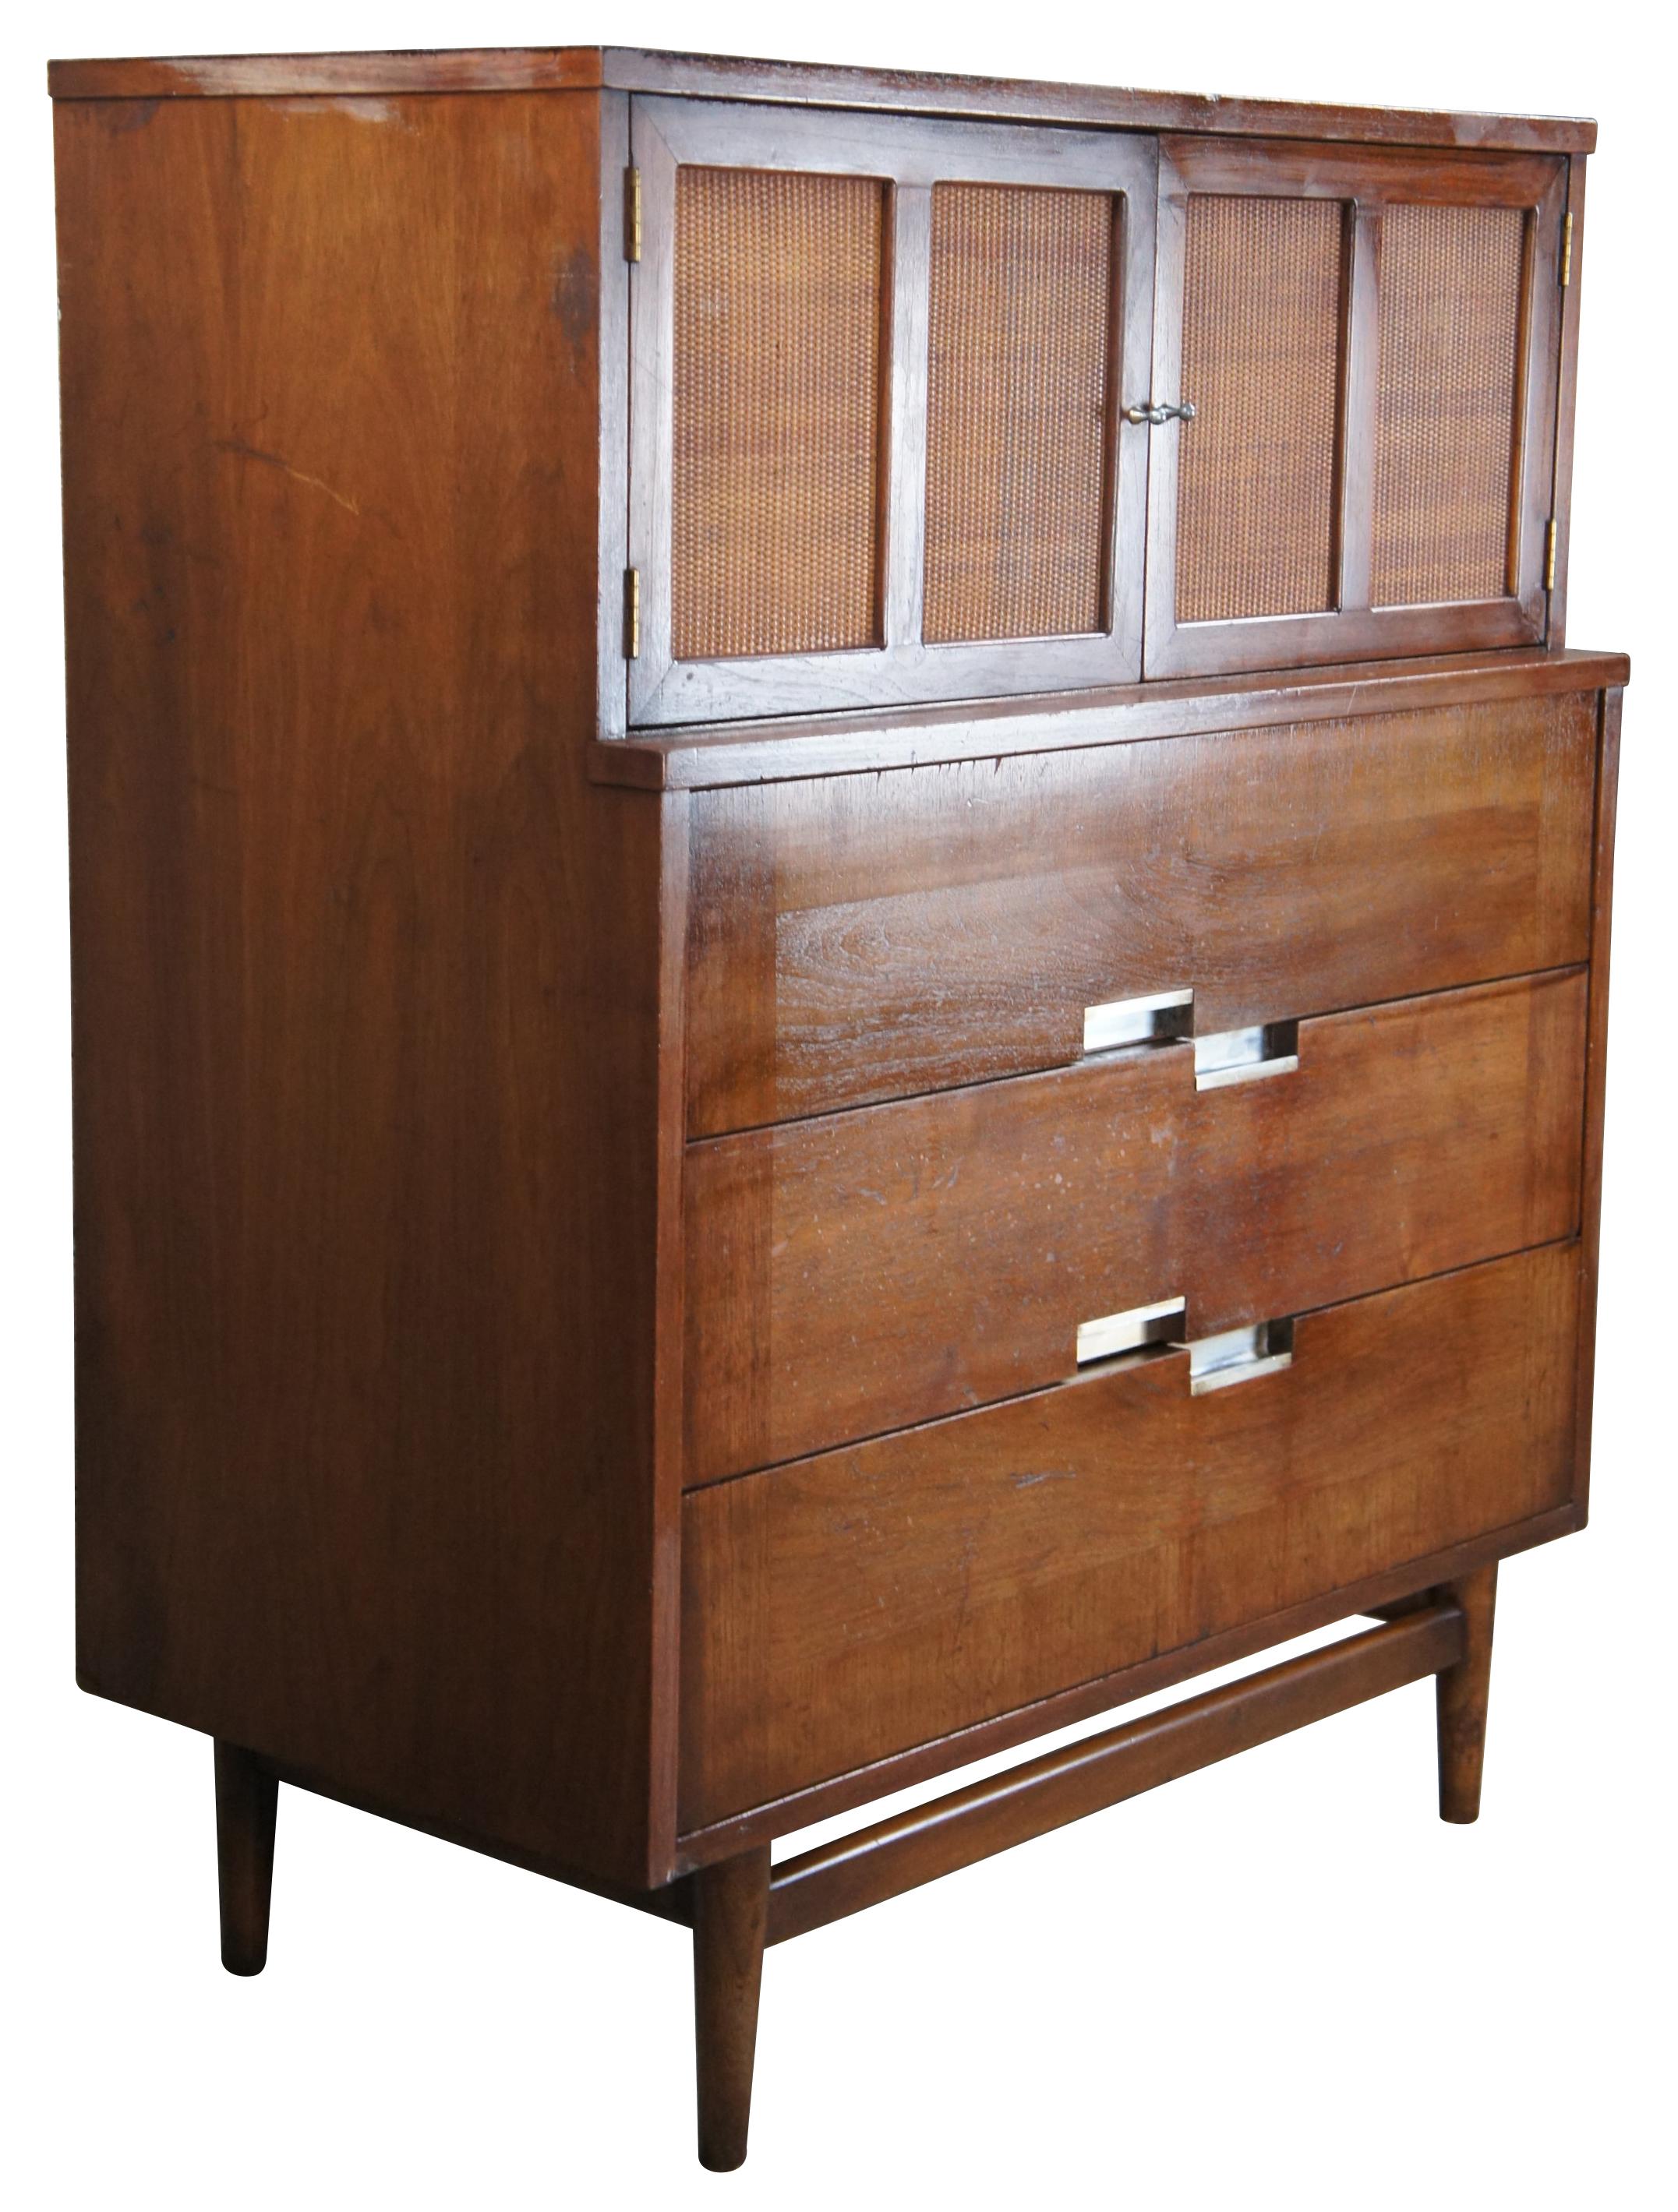 Mid-Century Modern Accord Bachelor chest of drawers designed by Merton Gershun, American (1909-1989) for American of Martinsville. Made of walnut featuring inset X top with upper cane panel cabinet that opens to two drawers, over three more drawers